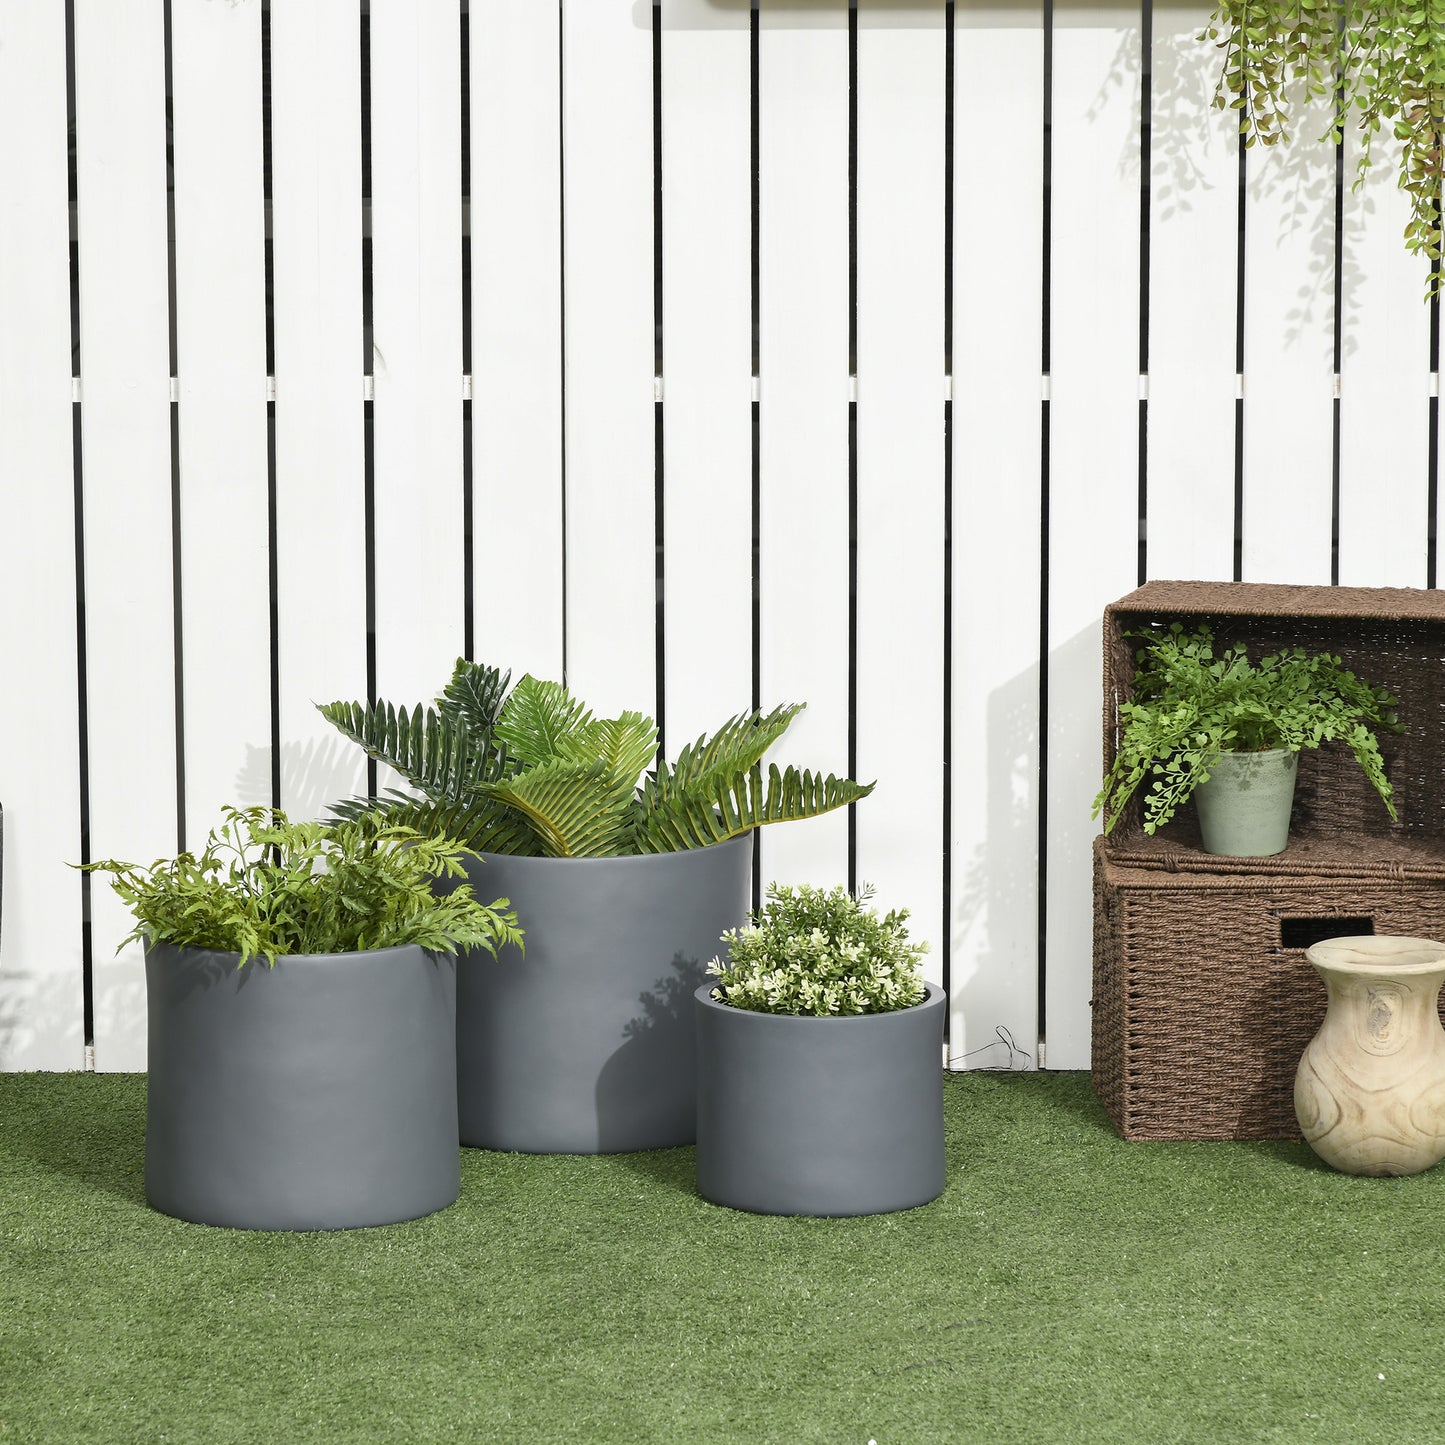 Set of 3 Outdoor Planter Set, 13/11.5/9in, Flower Pots with Drainage Holes, Outdoor Ready & Stackable Plant Pot for Indoor, Entryway, Patio, Yard, Garden